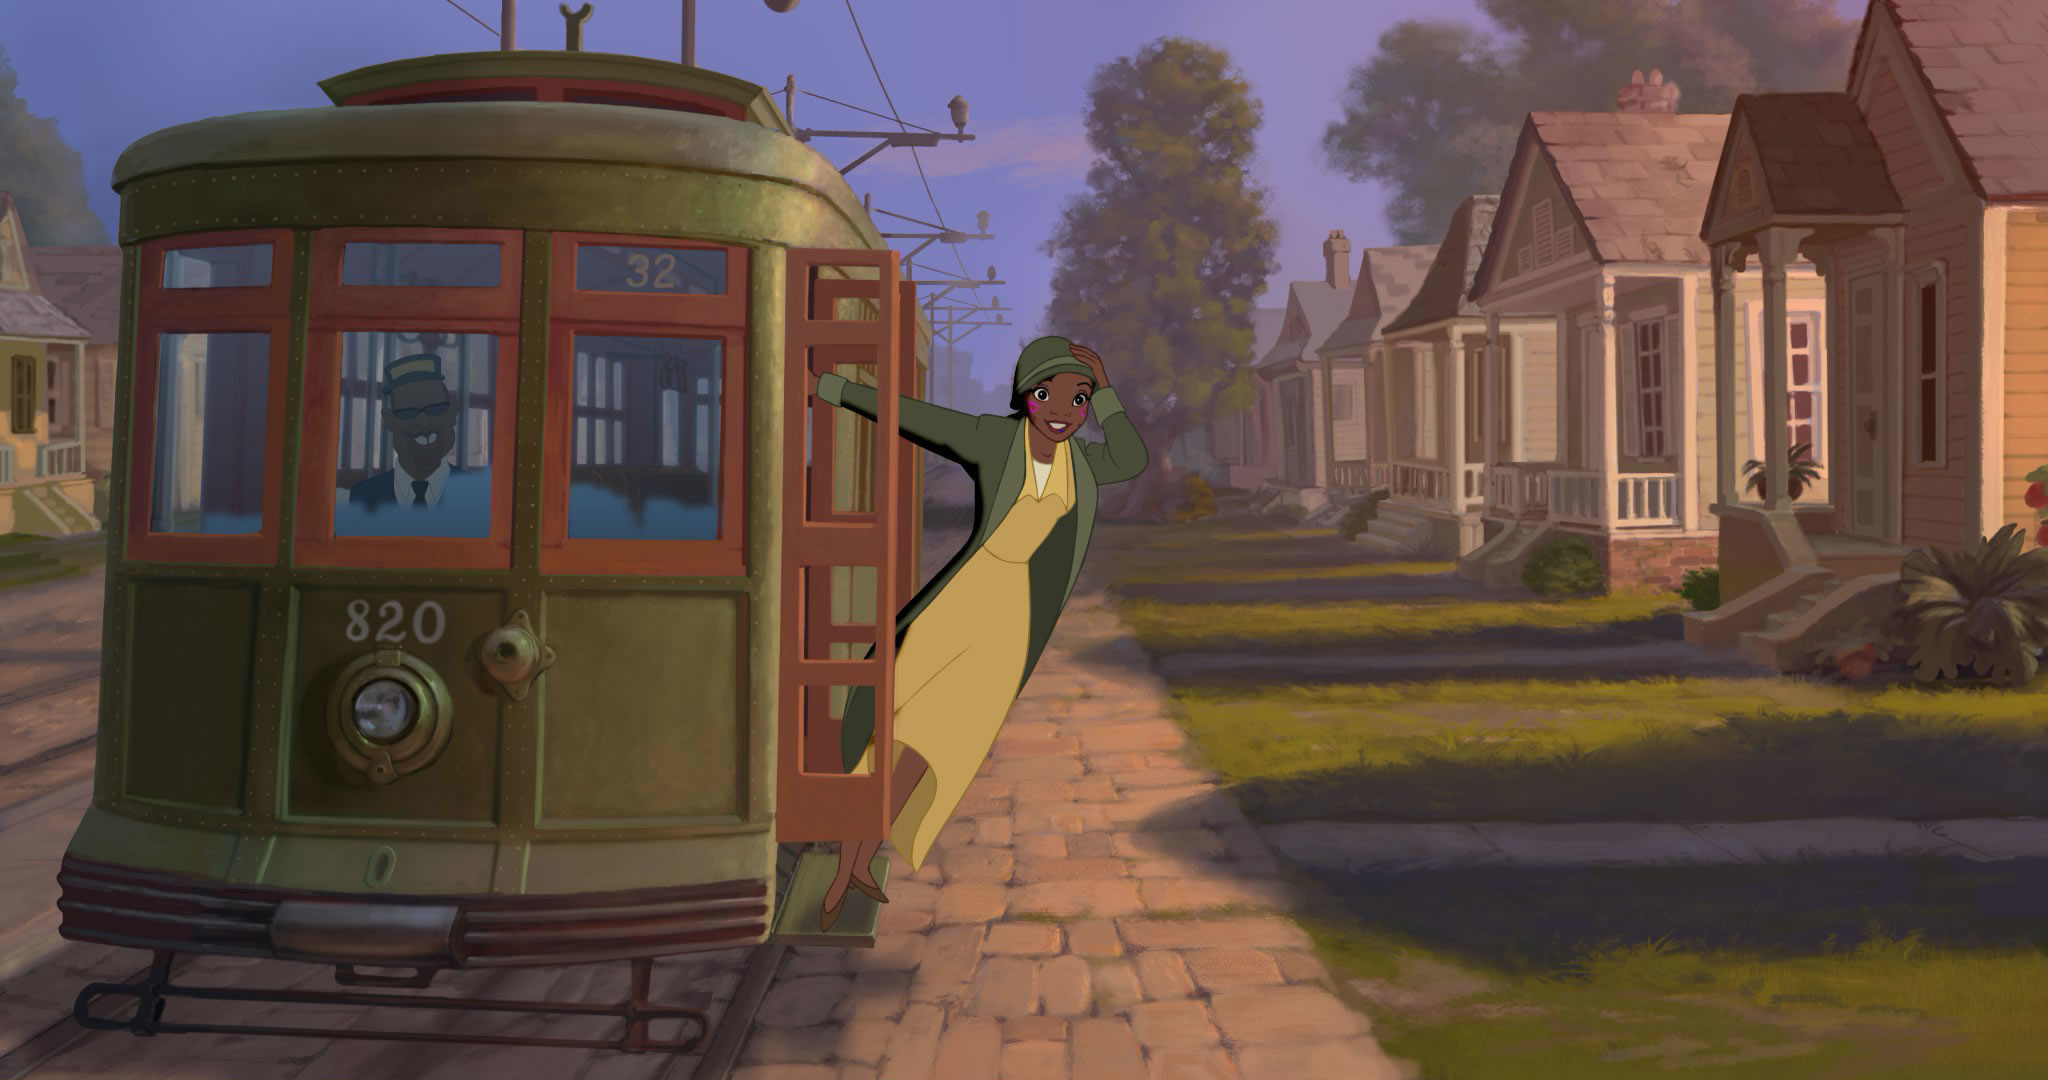 2048x1080 Tiana in a street car from the Disney movie Princess and the Frog wallpaper